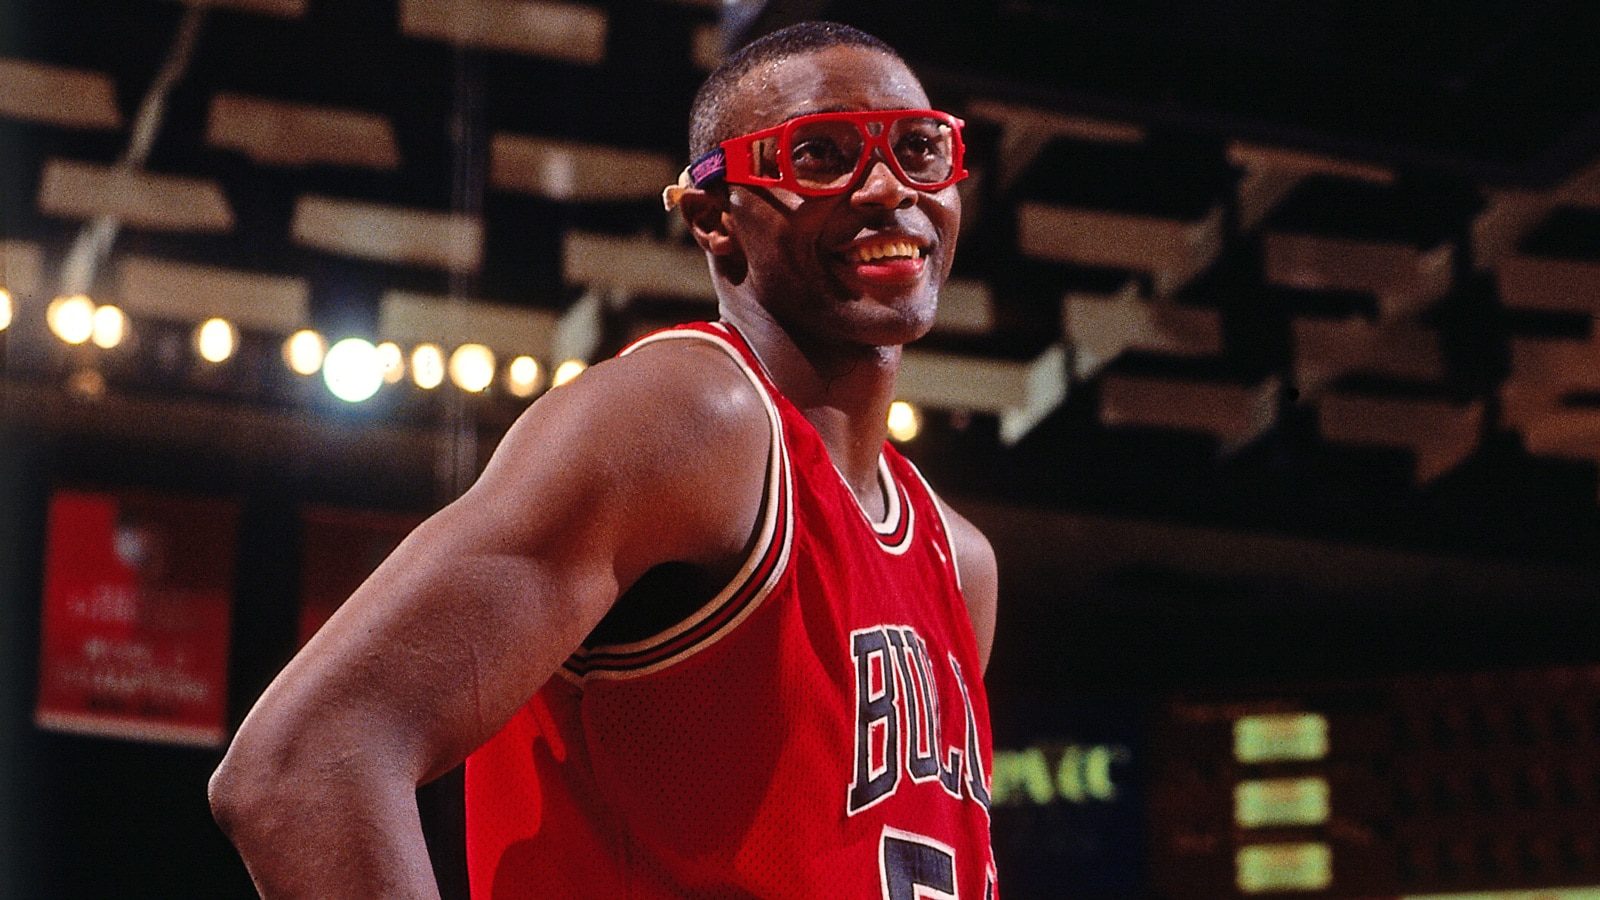 Horace Grant’s Championship Rings To Be Auctioned